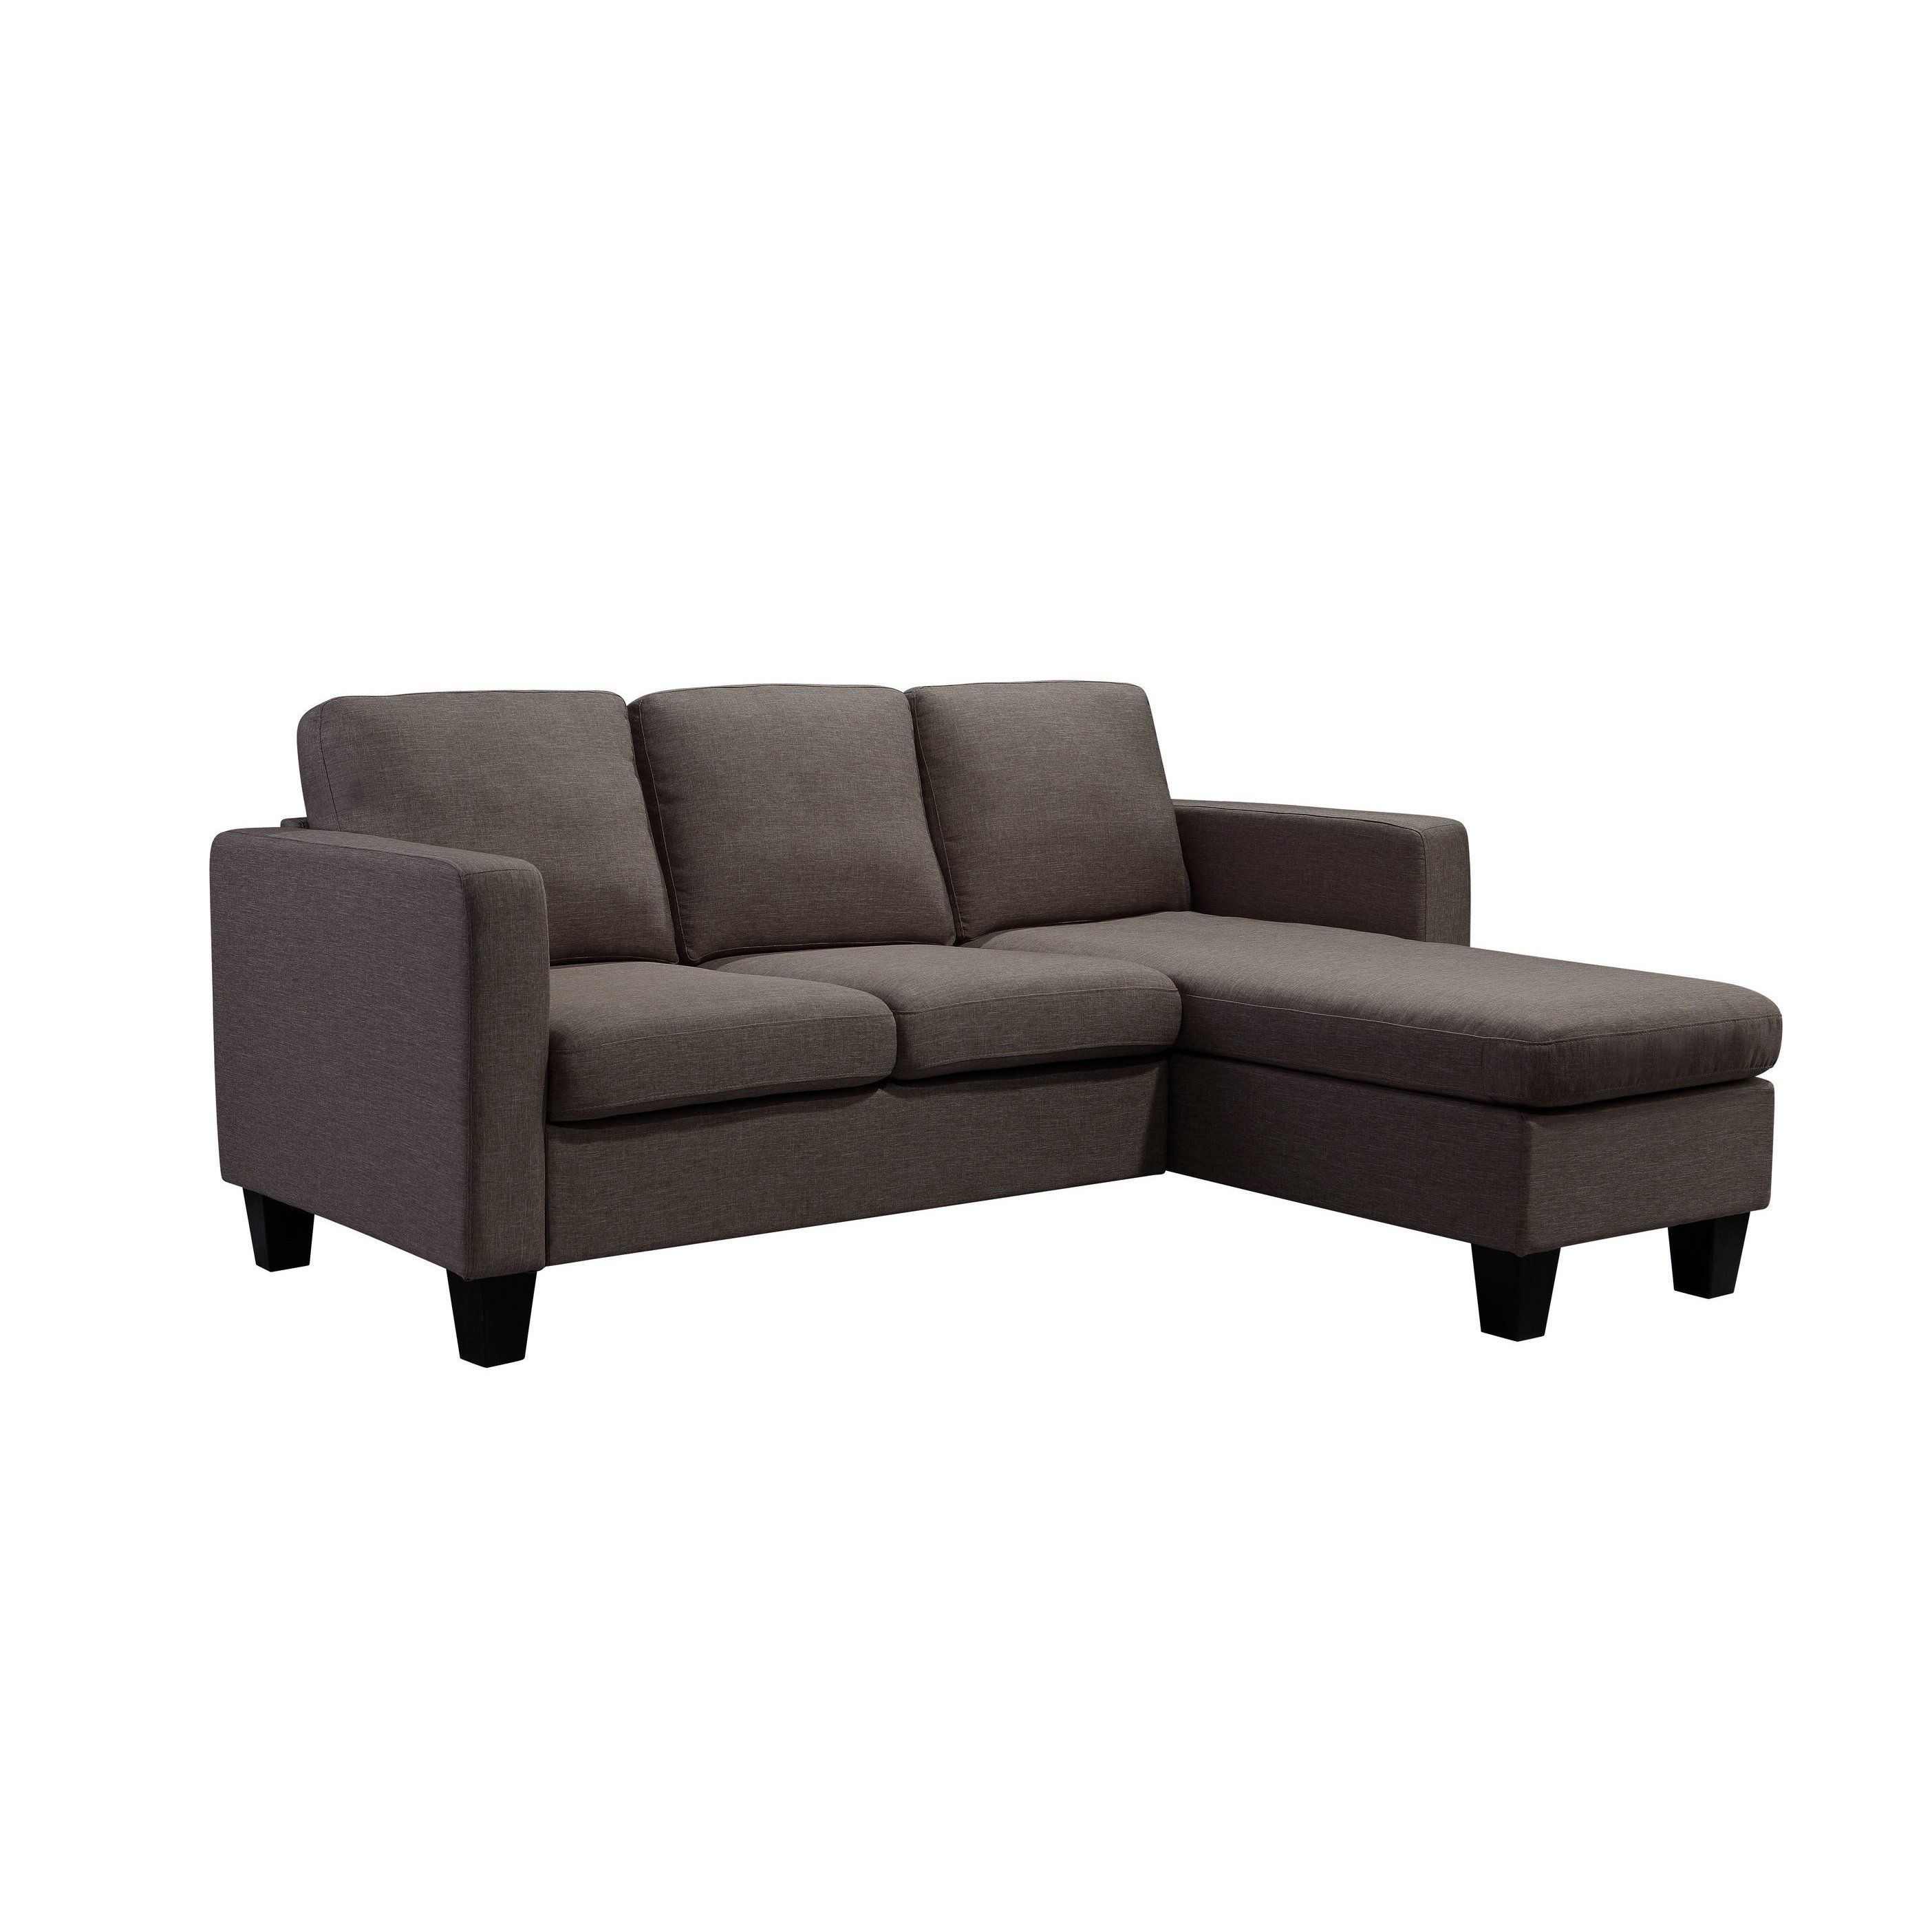 Buy Brown Sectional Sofas Online At Overstock | Our Best Living Throughout Sierra Down 3 Piece Sectionals With Laf Chaise (Photo 17 of 30)